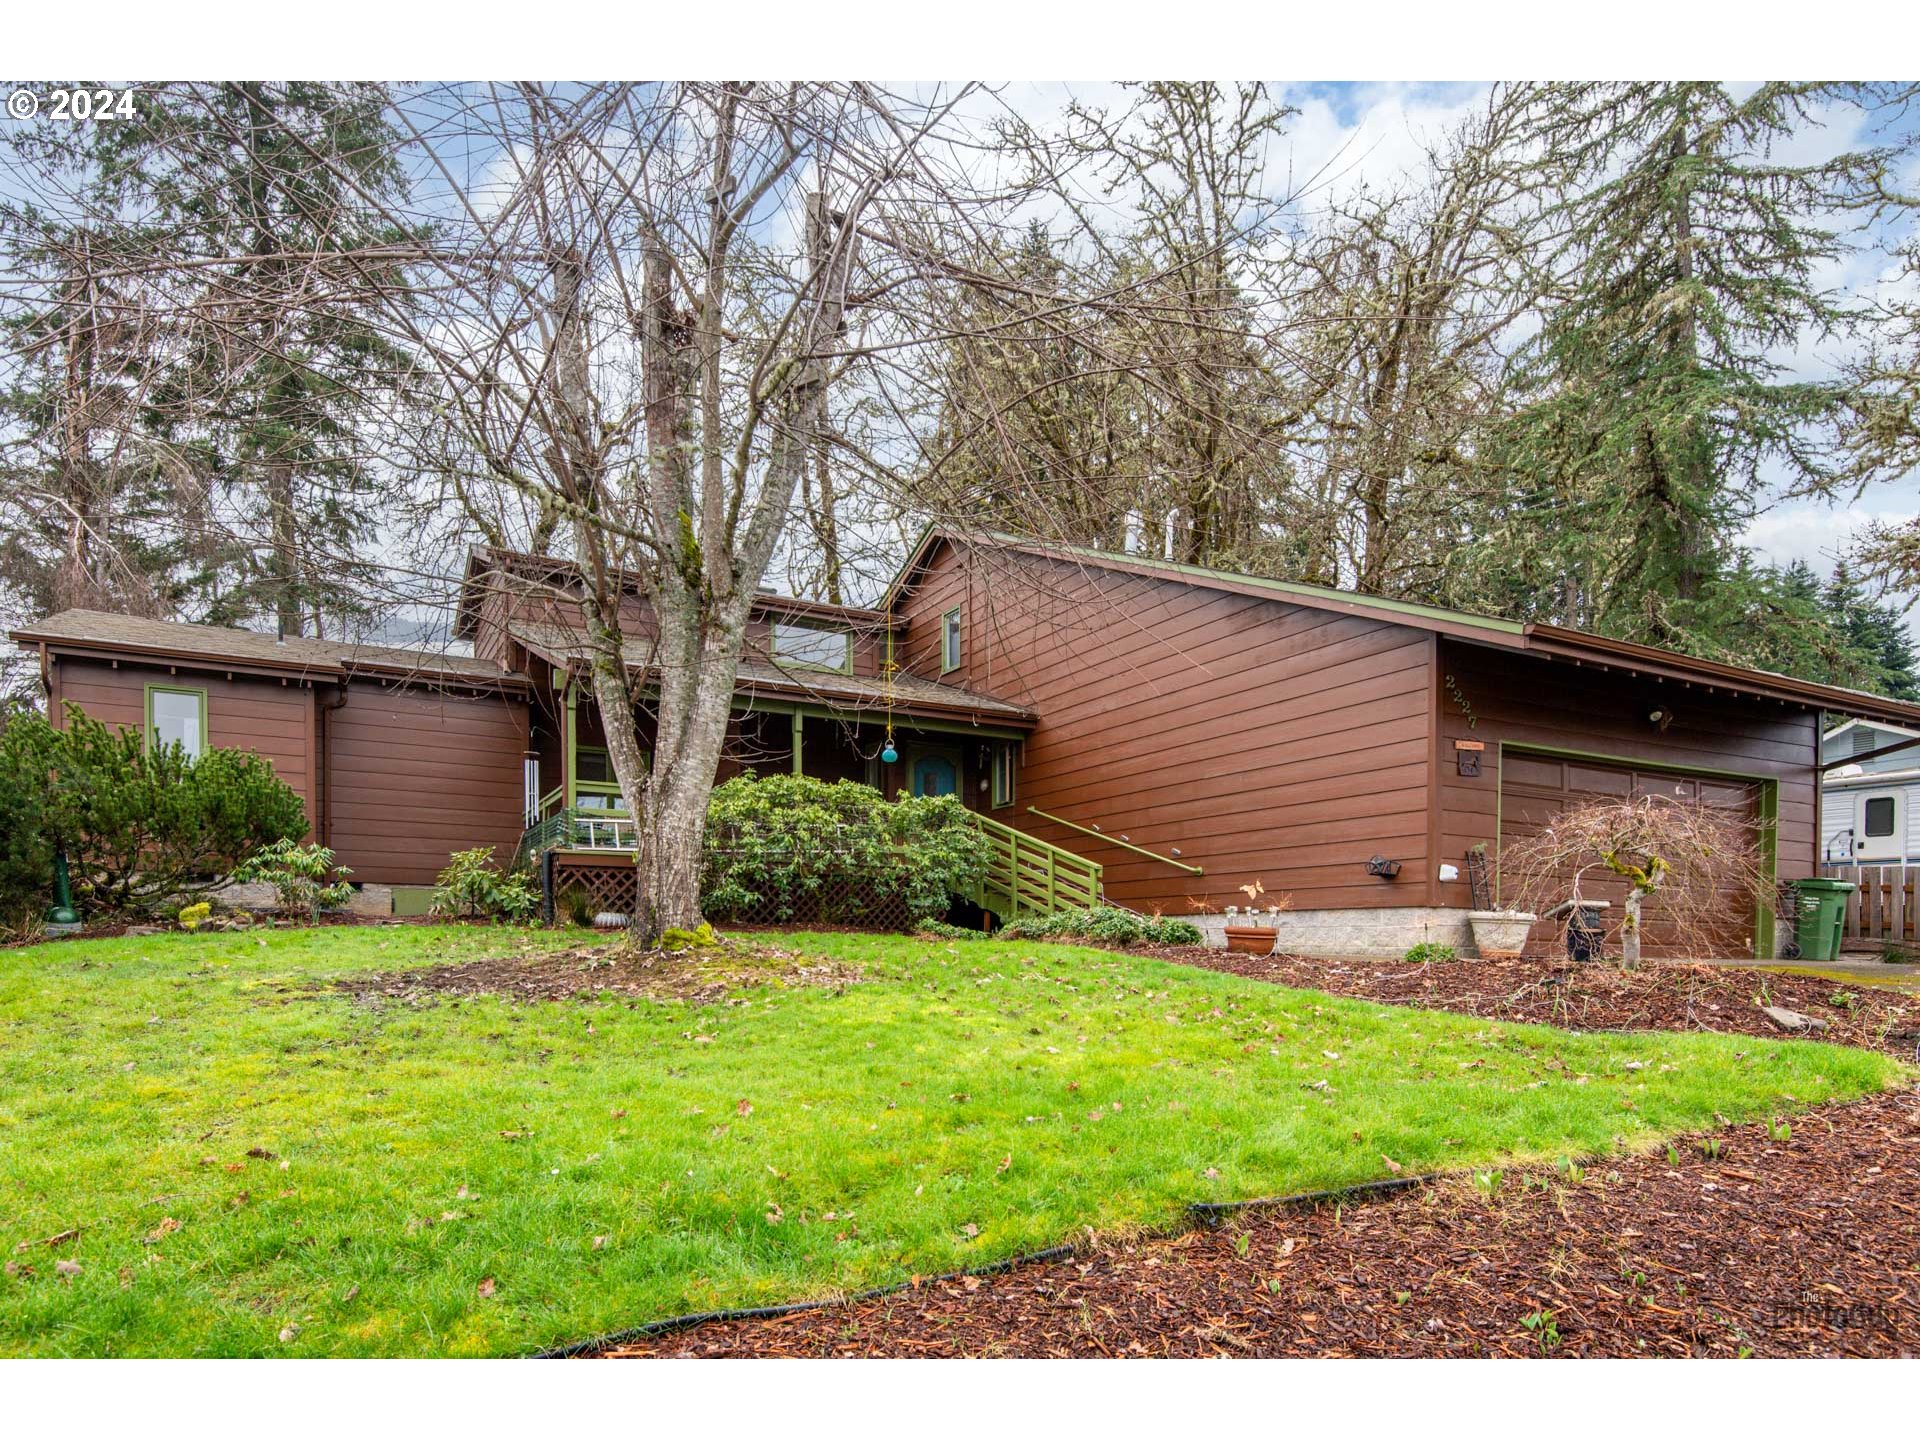 2227 W HARRISON AVE, Cottage Grove, OR 